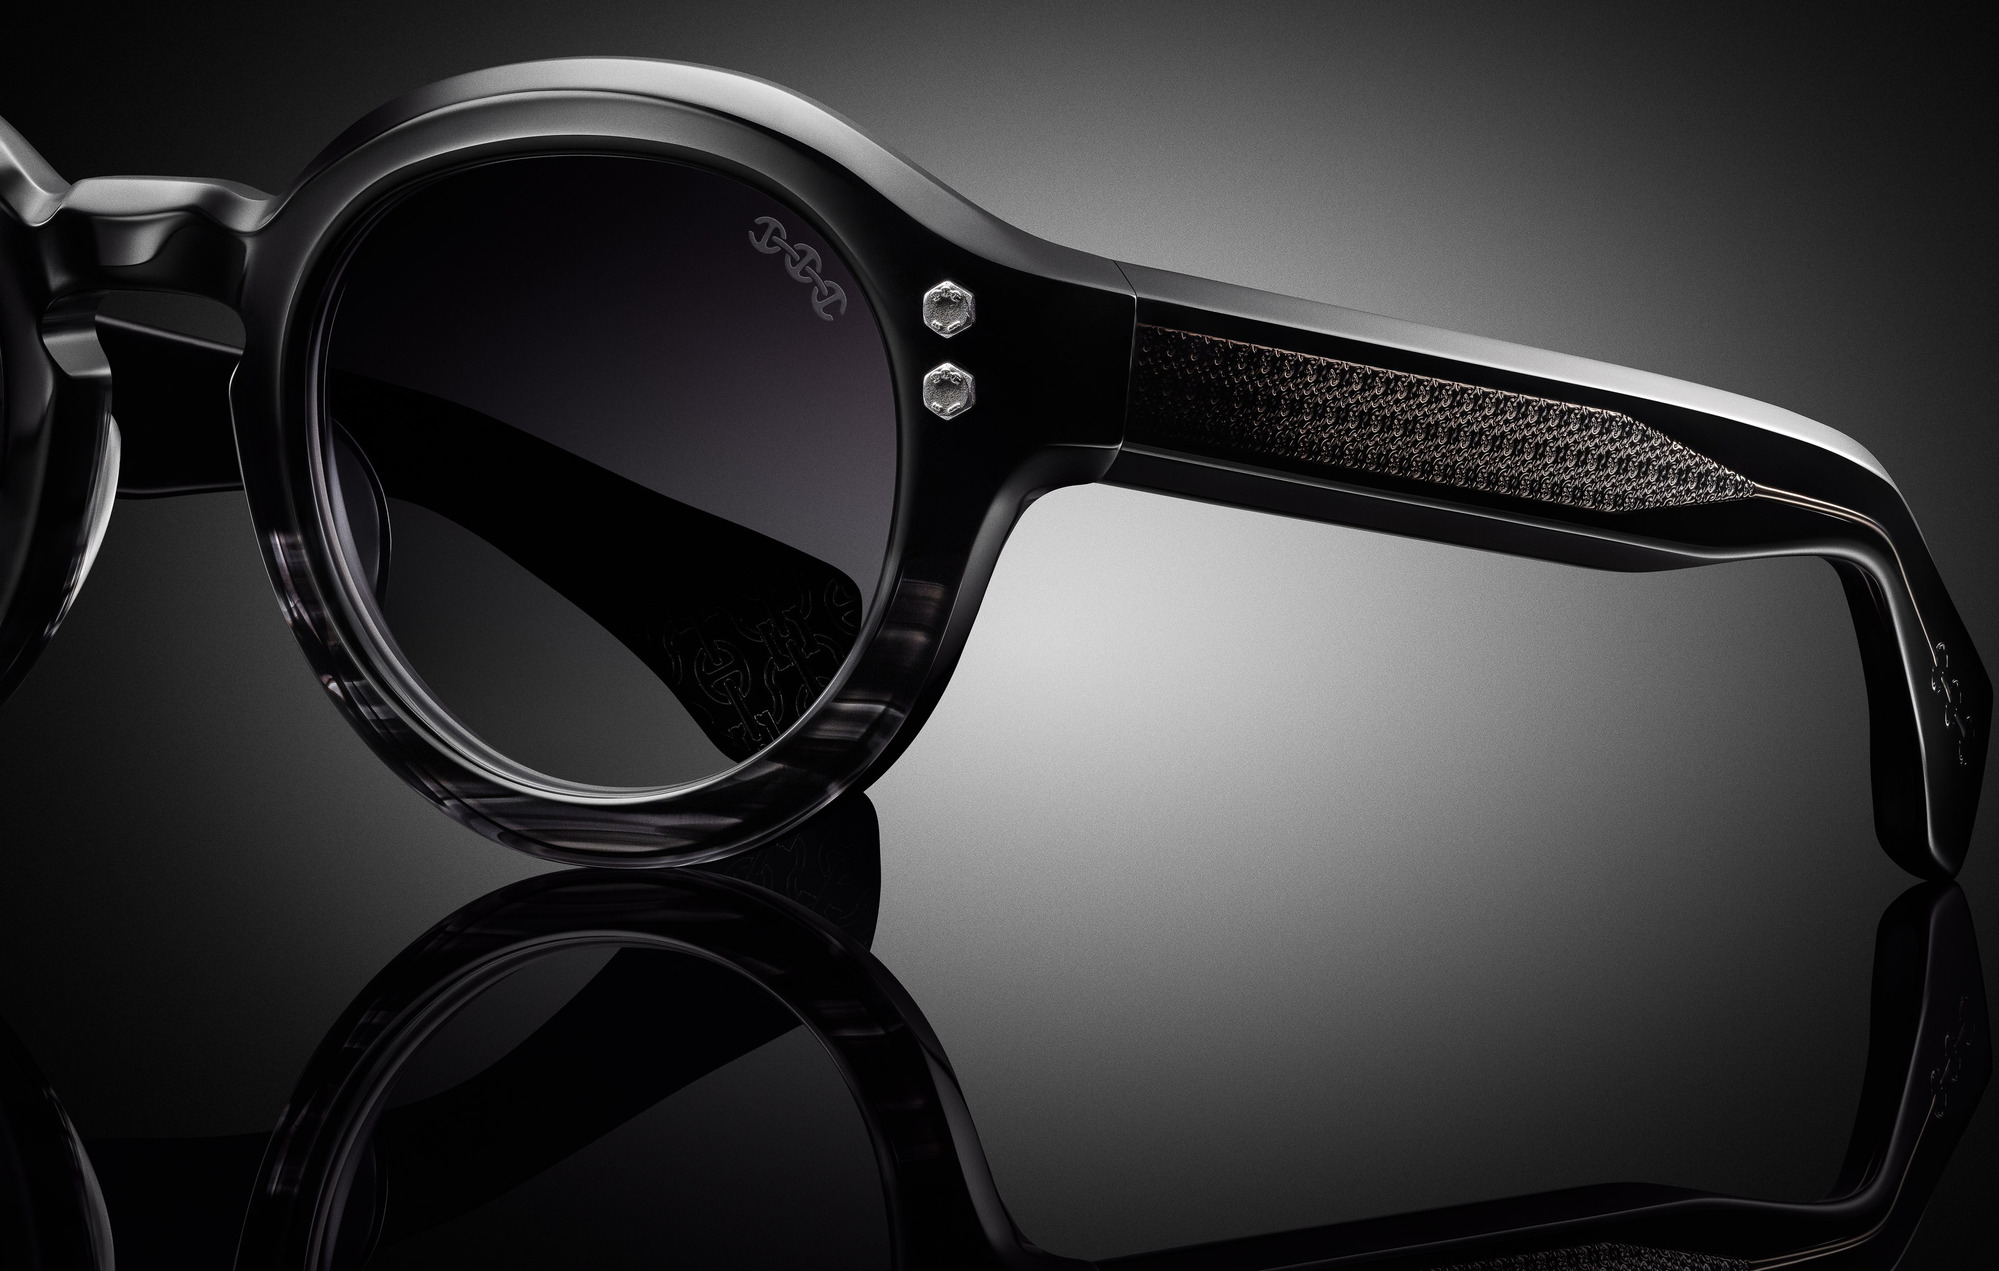 Commercial and advertising product photography for eyewear accessories by Hoorsenbuhs